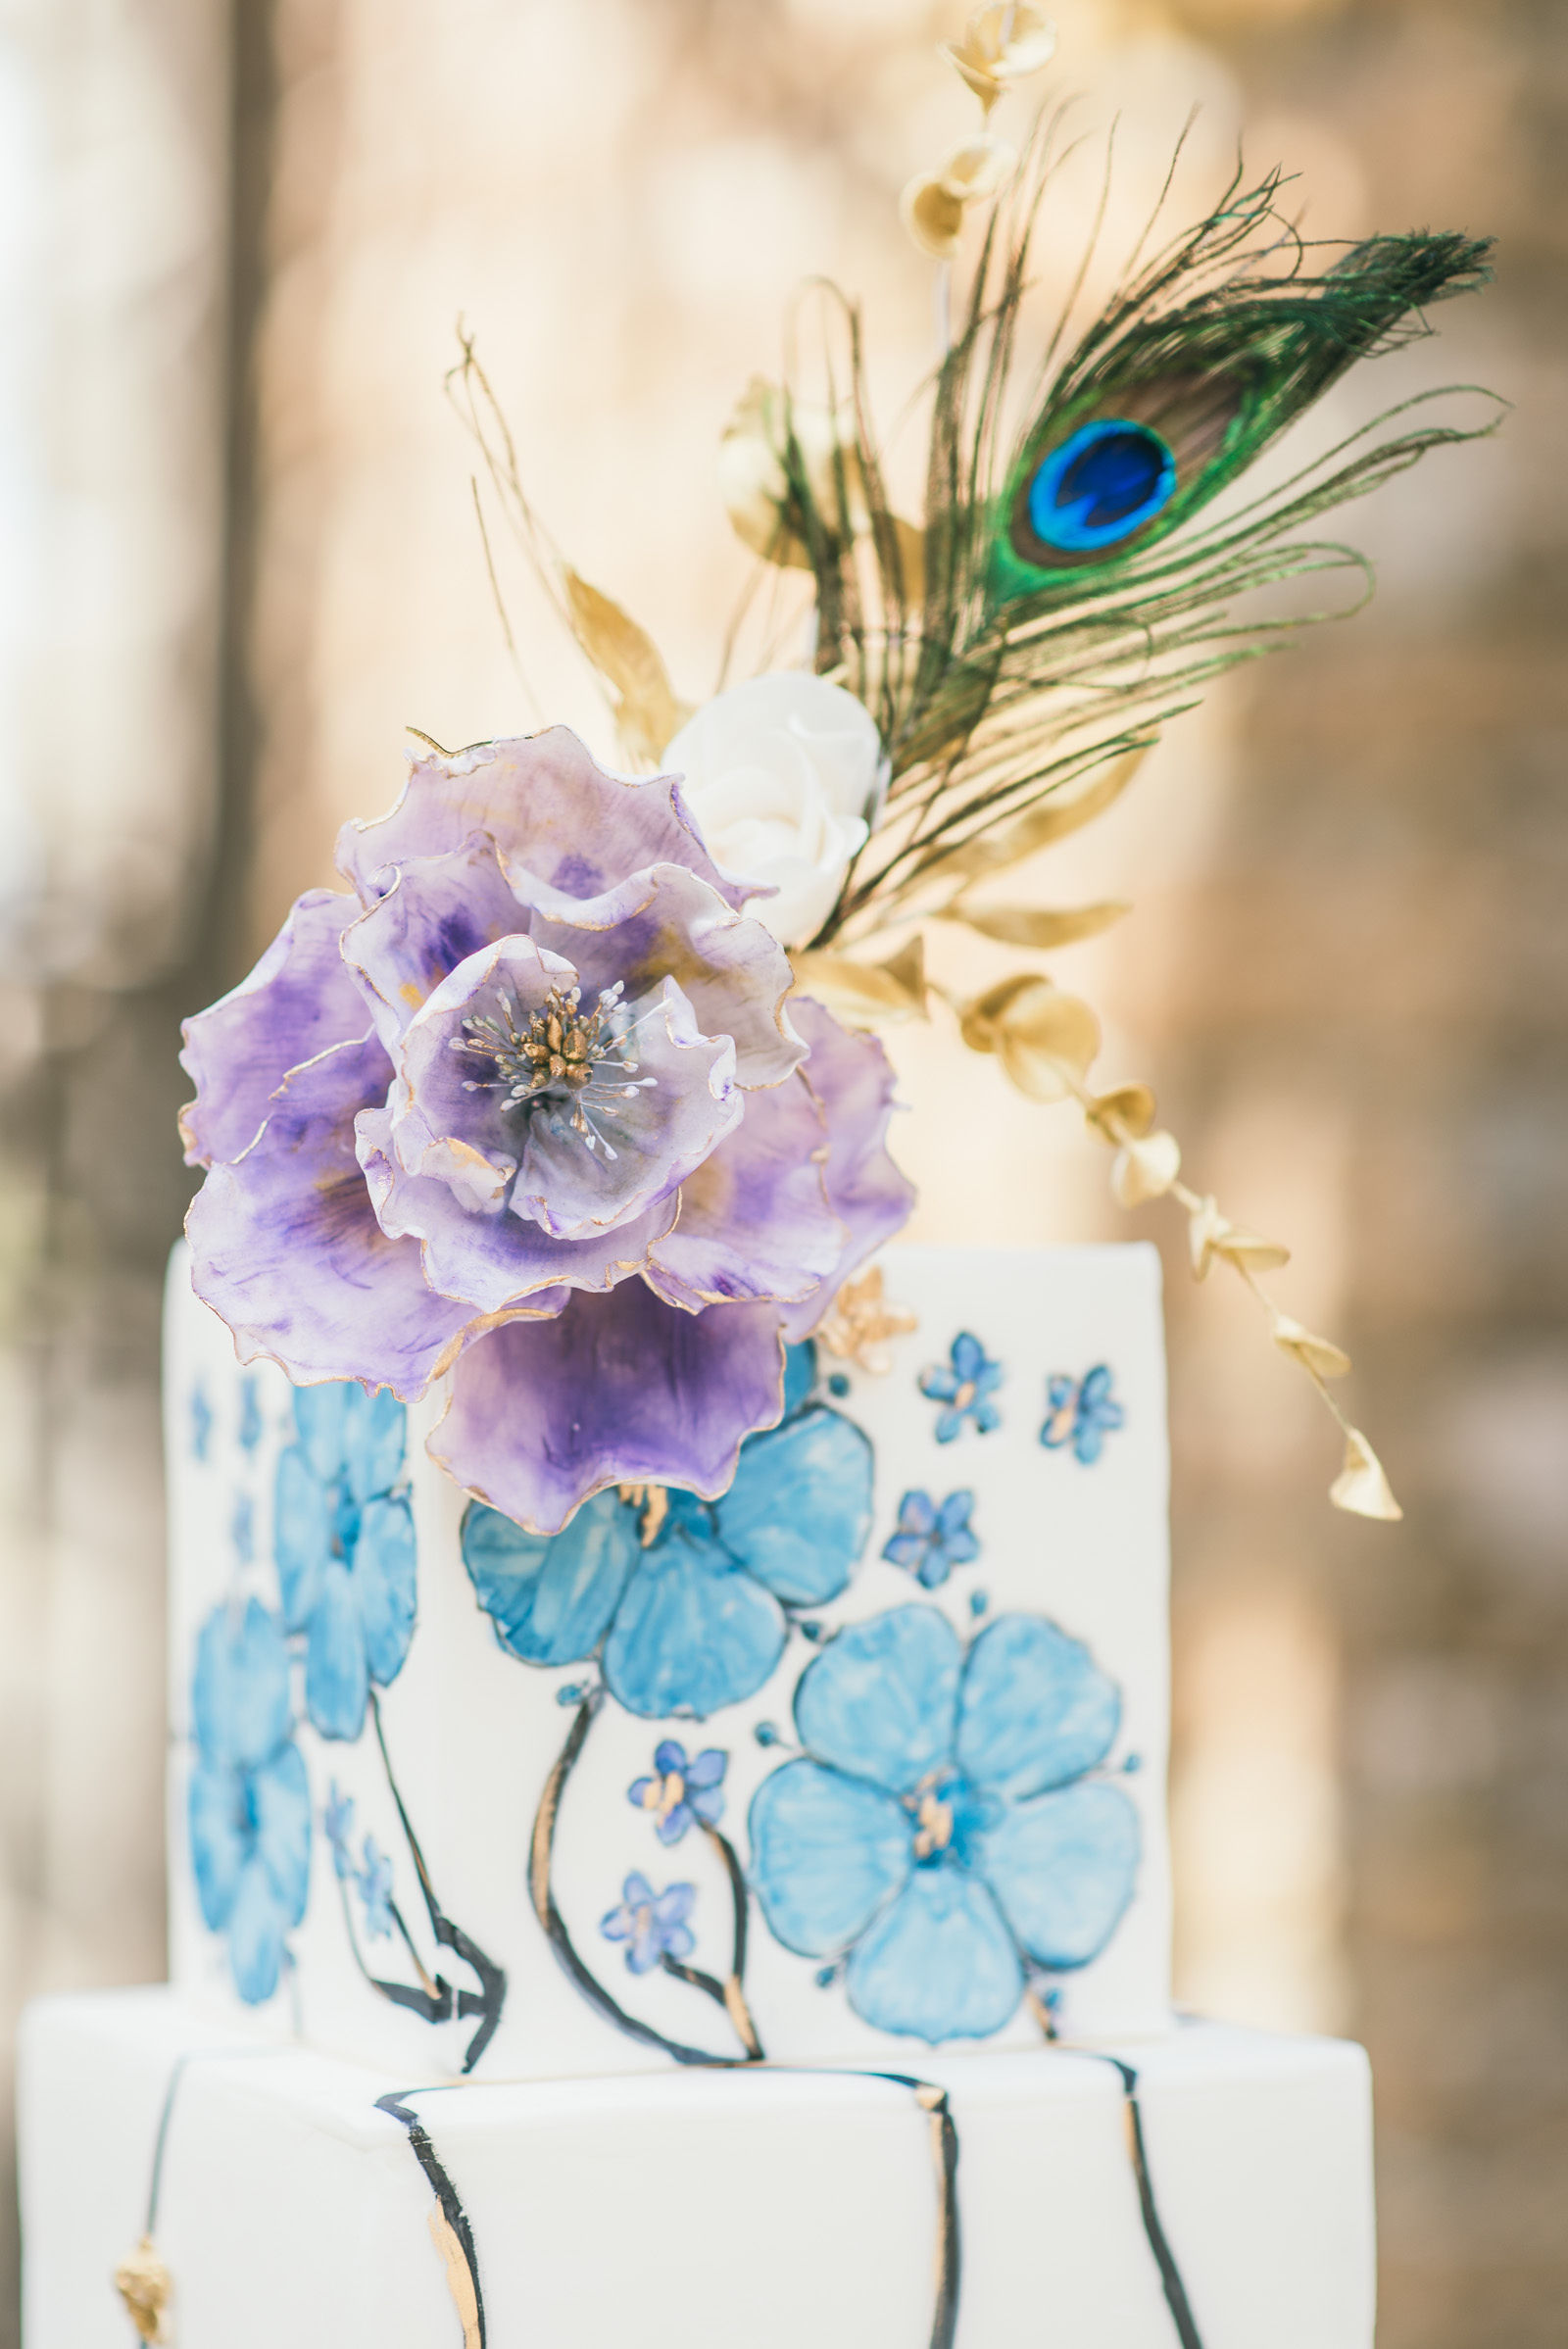 Blue Art Nouveau Cake with Peacock Feather